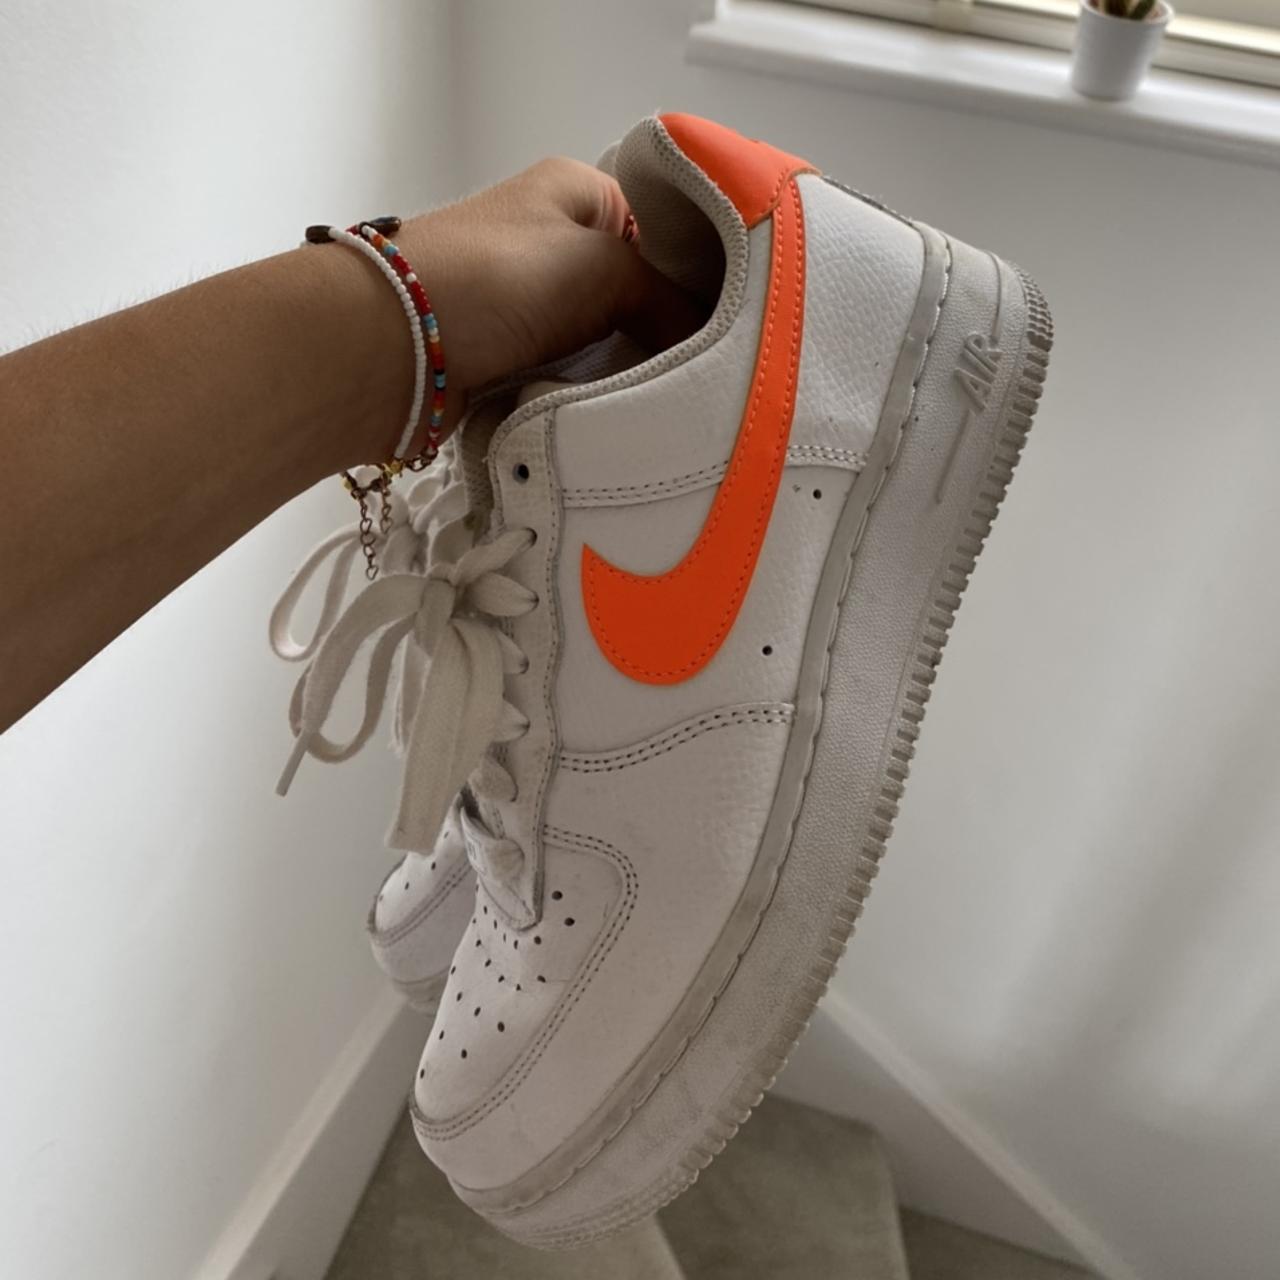 Nike Air Force 1 orange tick with reflective laces. - Depop